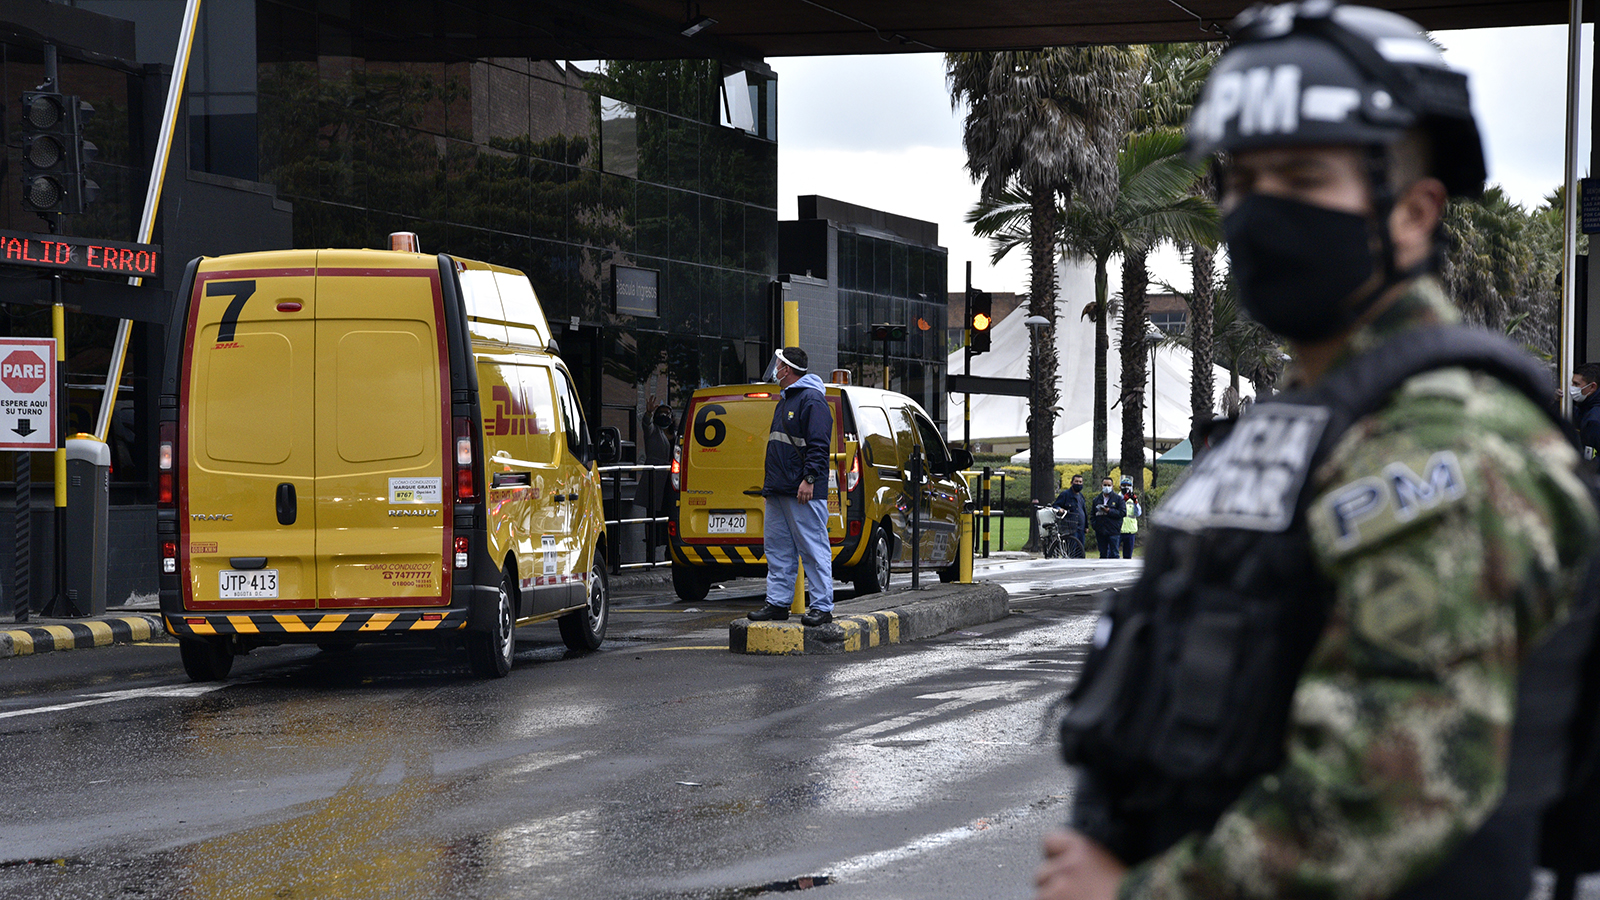 A soldier stands guard as DHL company vans transport a batch of doses of the Pfizer-BioNTech Covid-19 vaccine to the Free Trade Zone to be stored in freezers on February 15, in Bogota, Colombia.